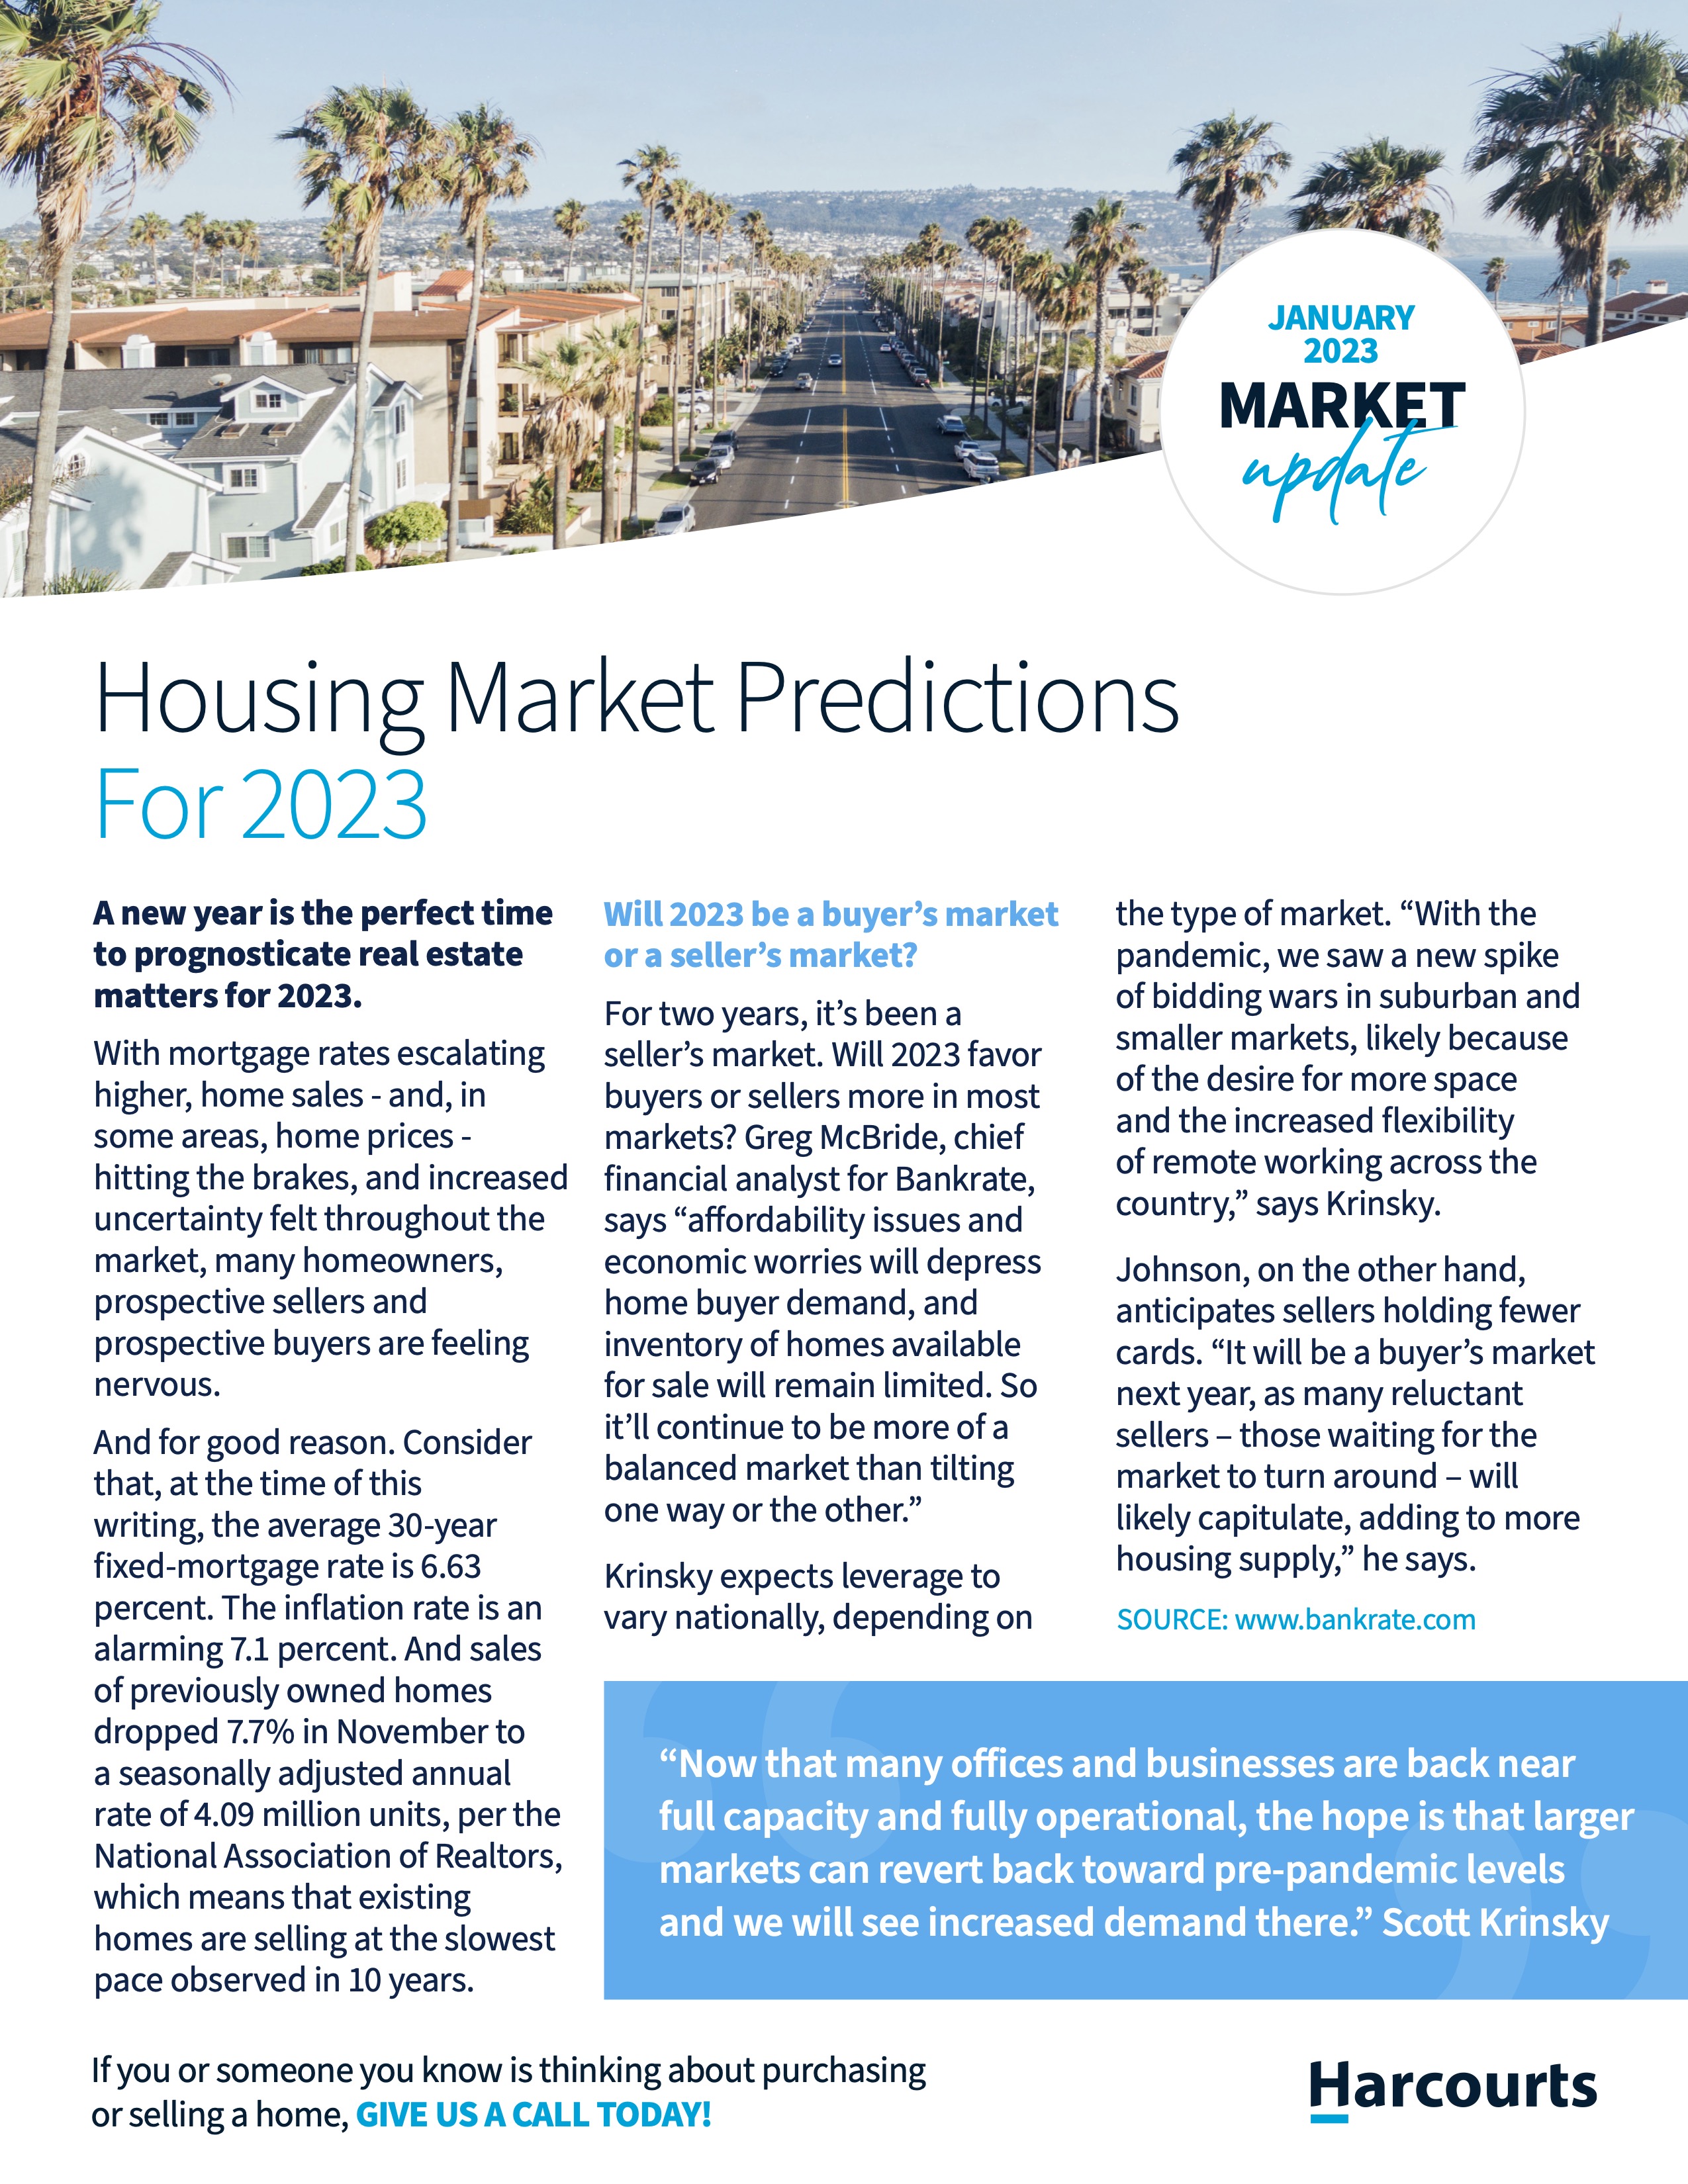 HOUSING MARKET PREDICTIONS FOR 2023